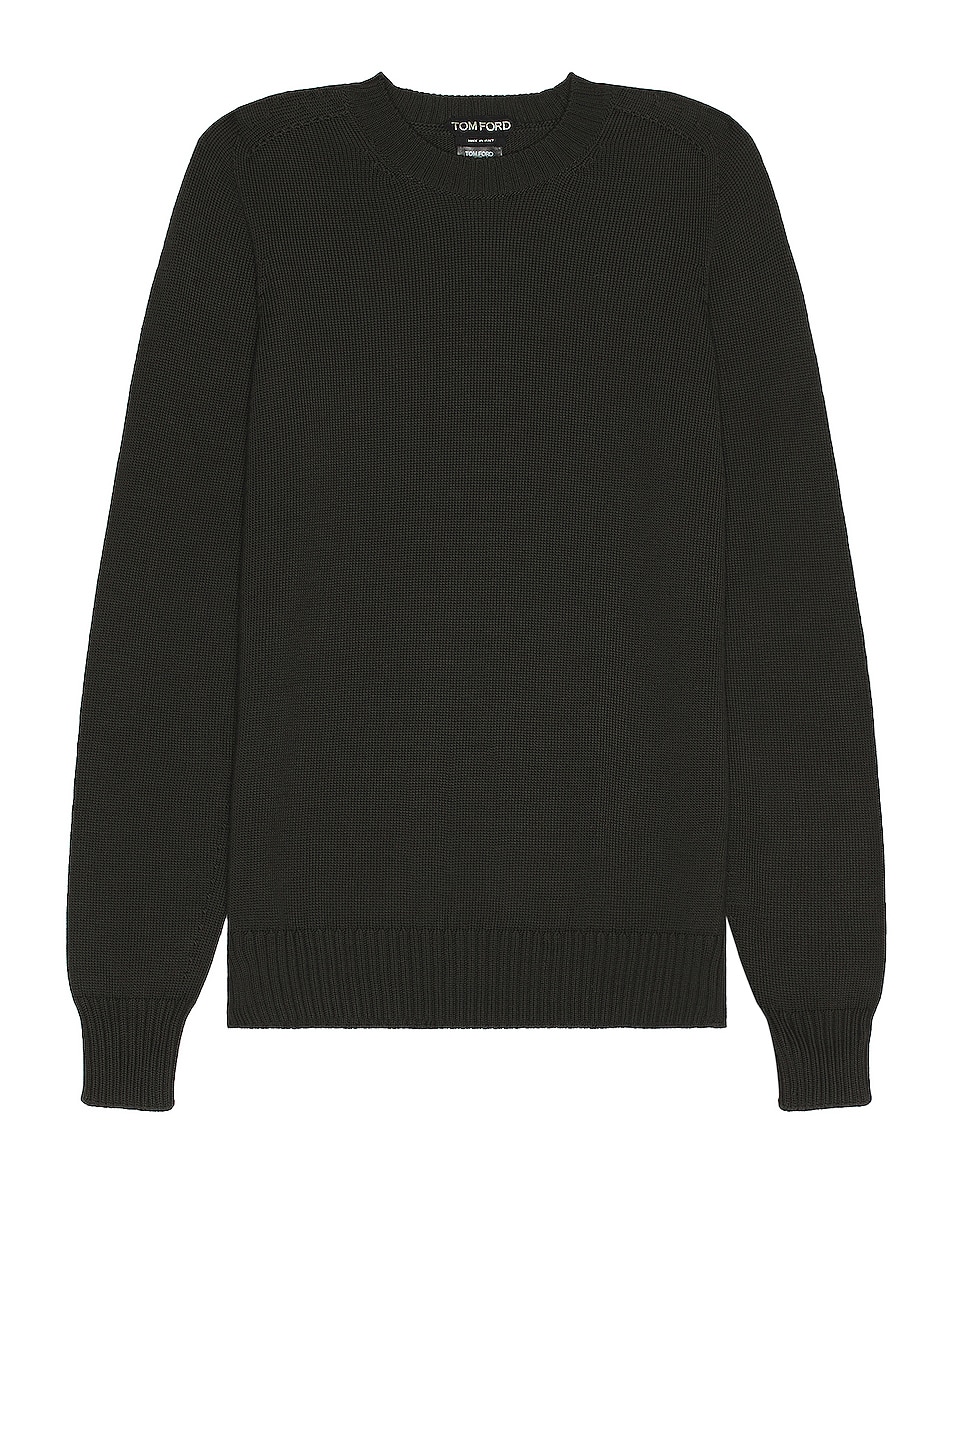 Image 1 of TOM FORD Cotton Silk Ls Crewneck in Charcoal